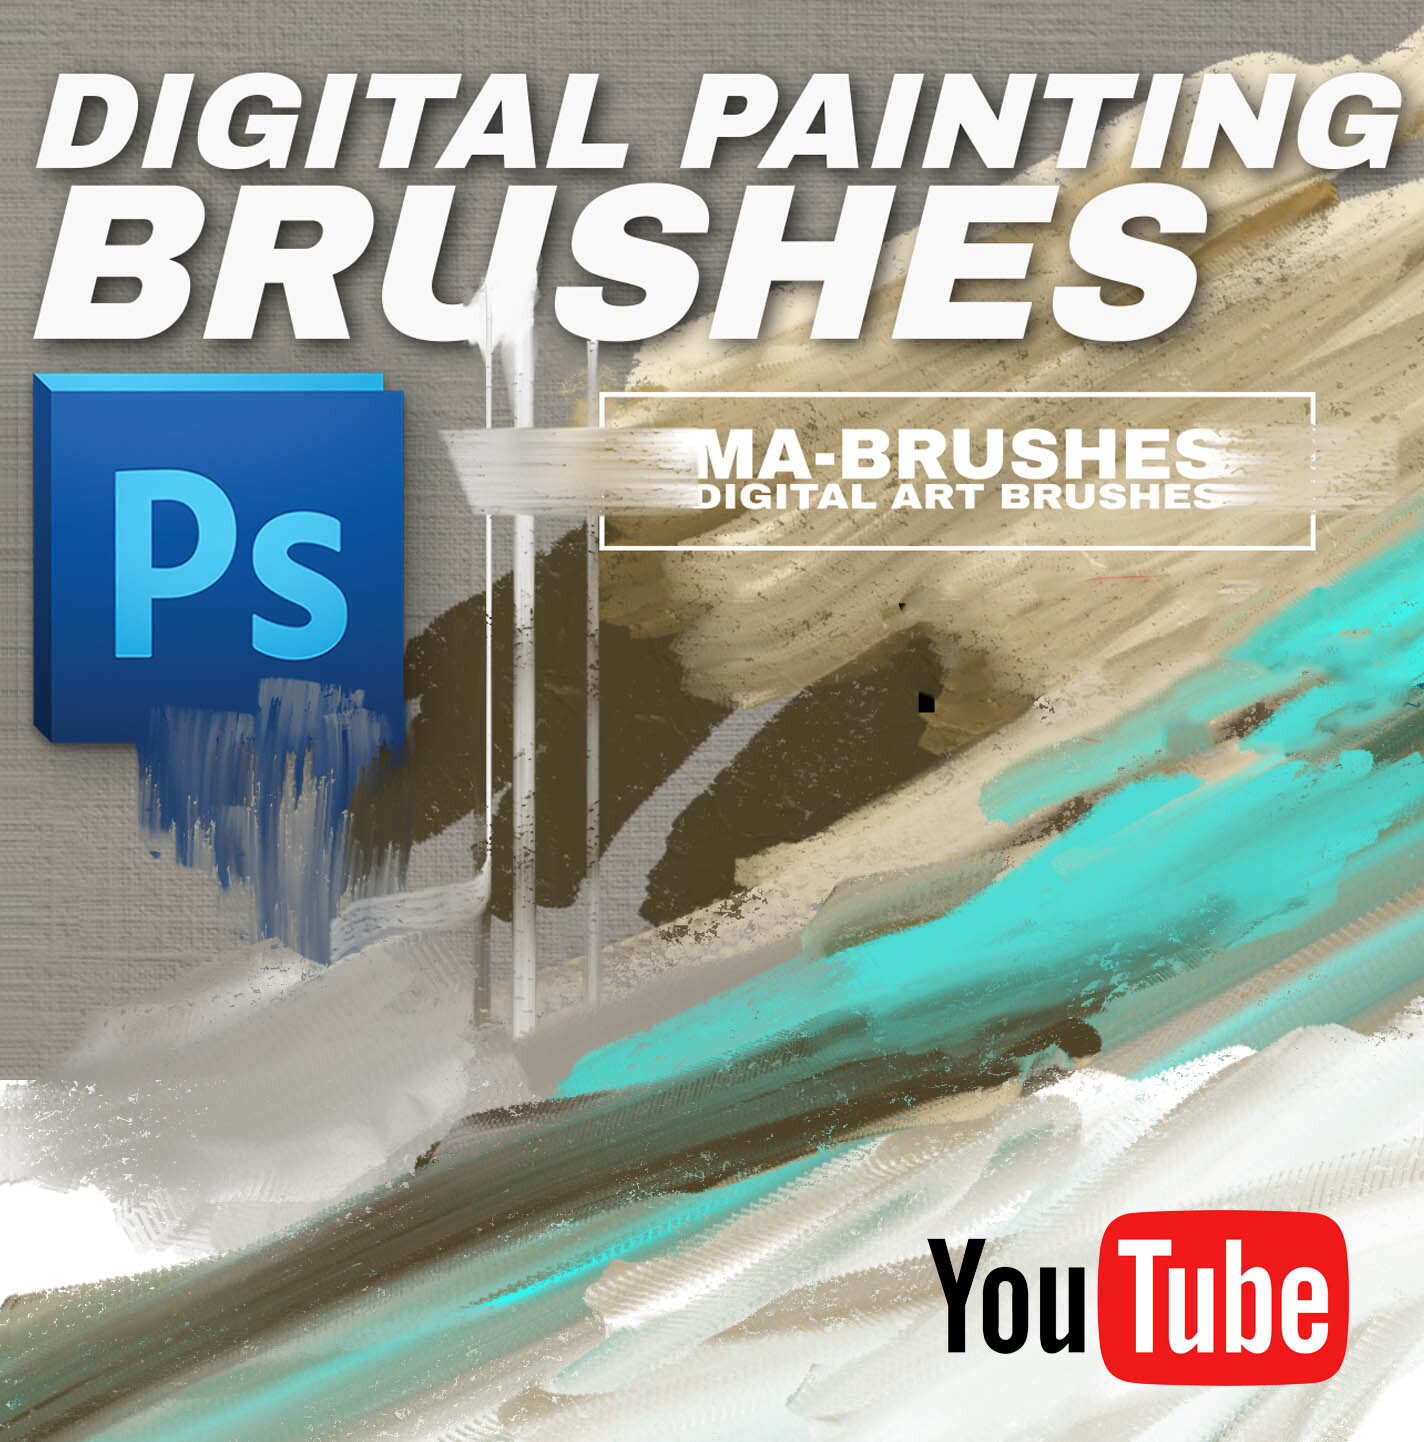 New Short Video of the MA-Brushes on YouTube